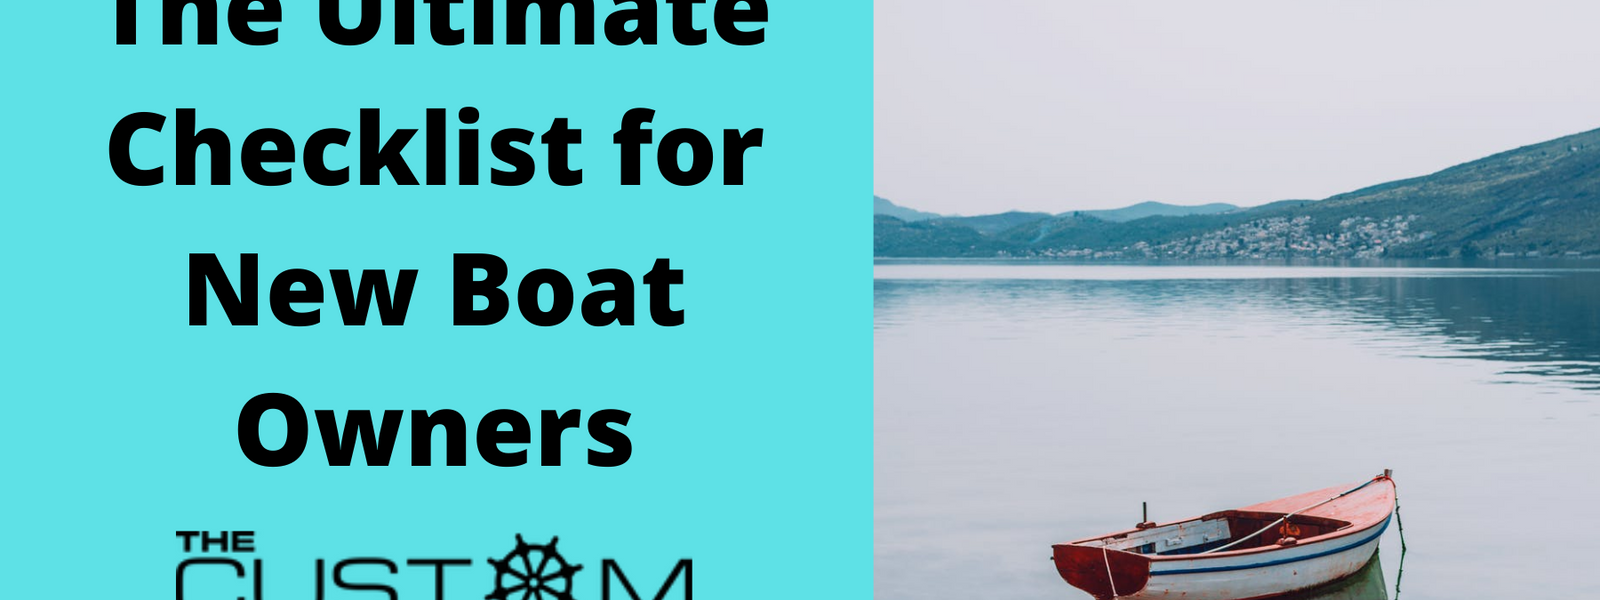 The Ultimate Checklist for New Boat Owners